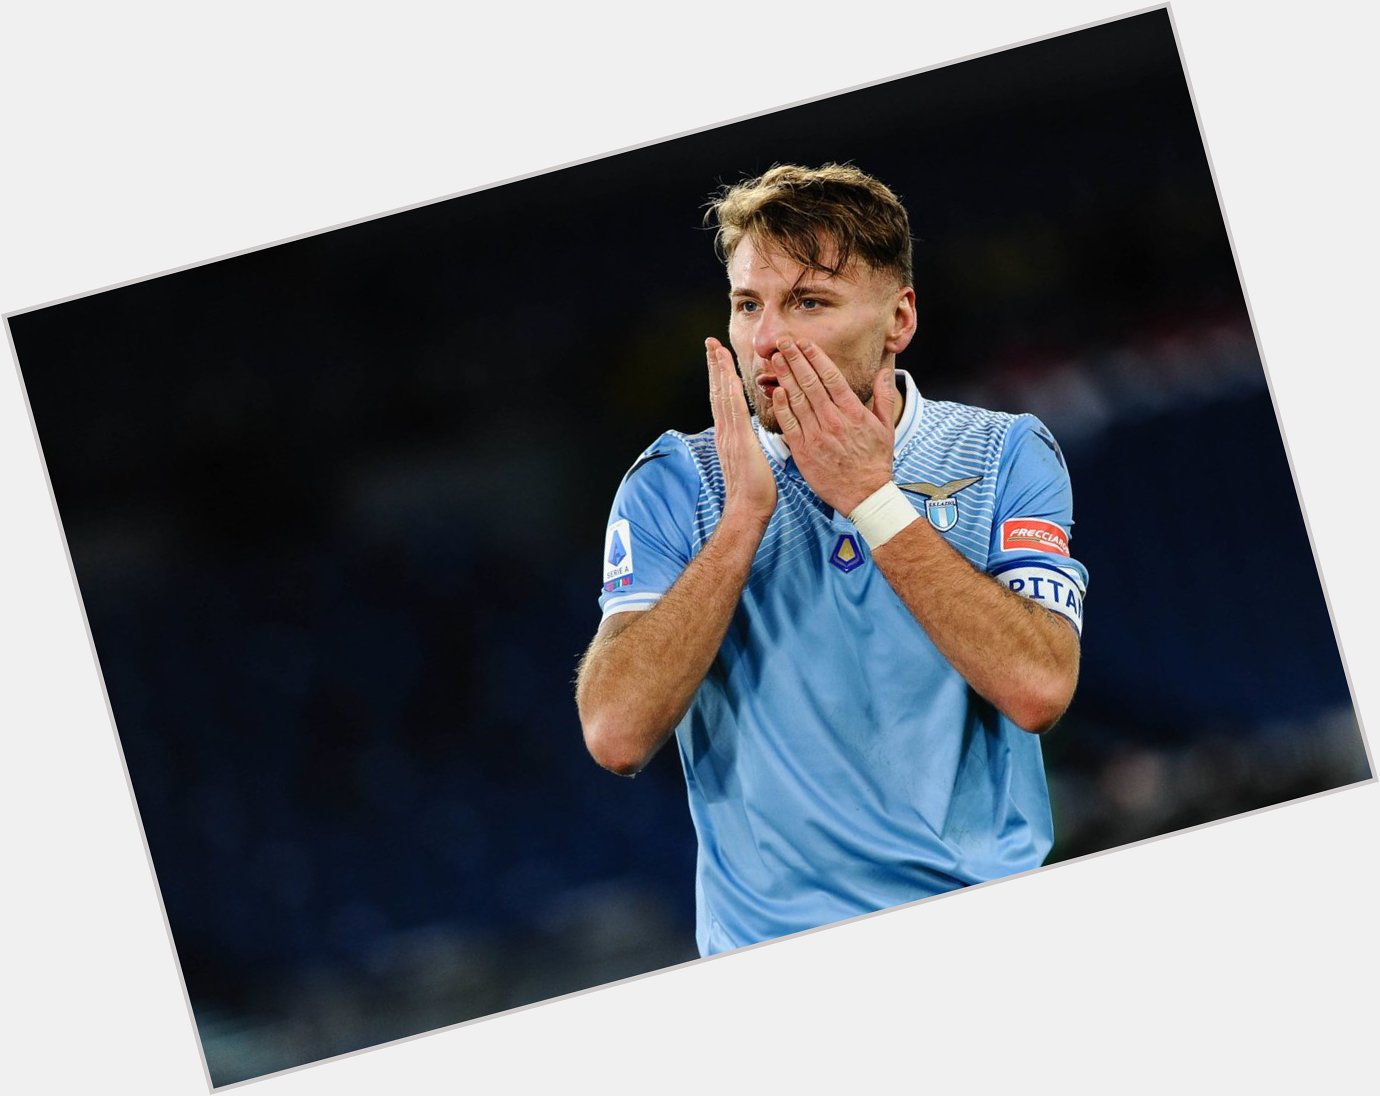 Happy birthday to Ciro Immobile, who turns 31 today. 